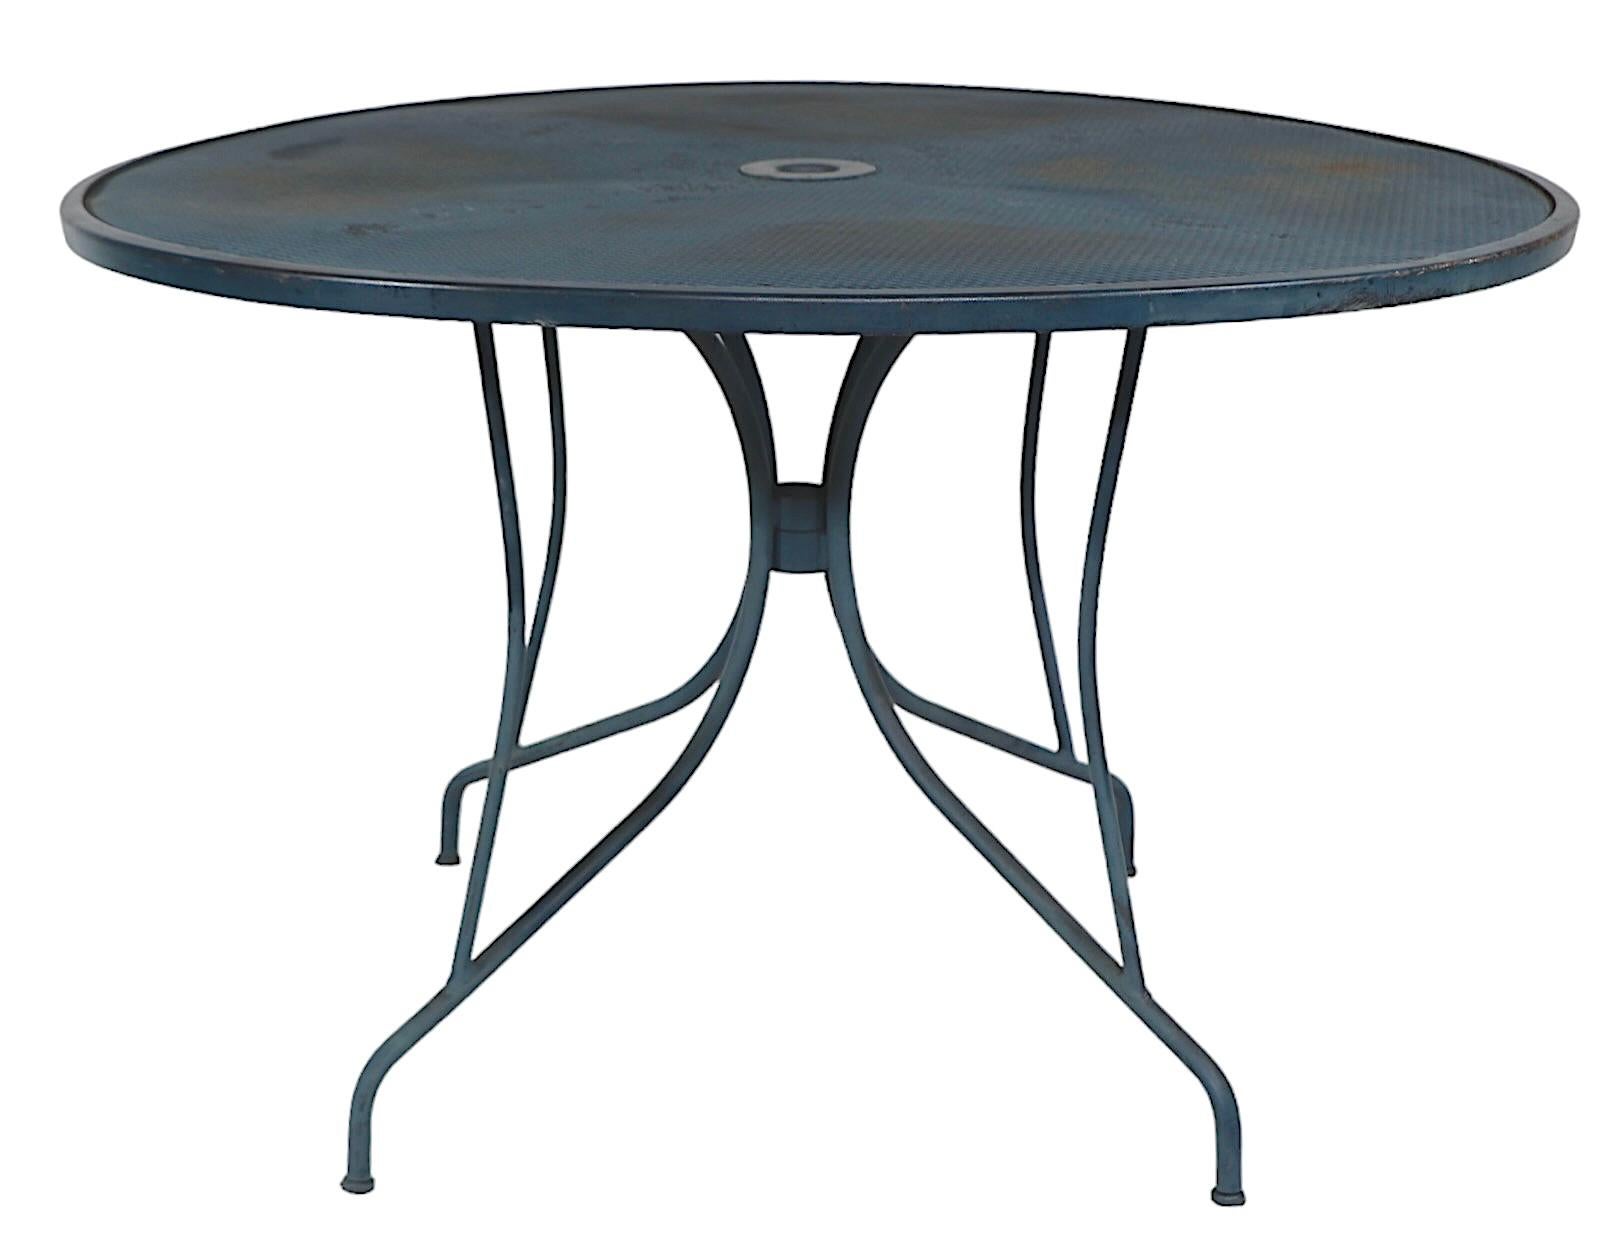 Vintage Garden Patio Poolside Cafe Dining Table by Meadowcraft c. 1950/60's In Good Condition For Sale In New York, NY